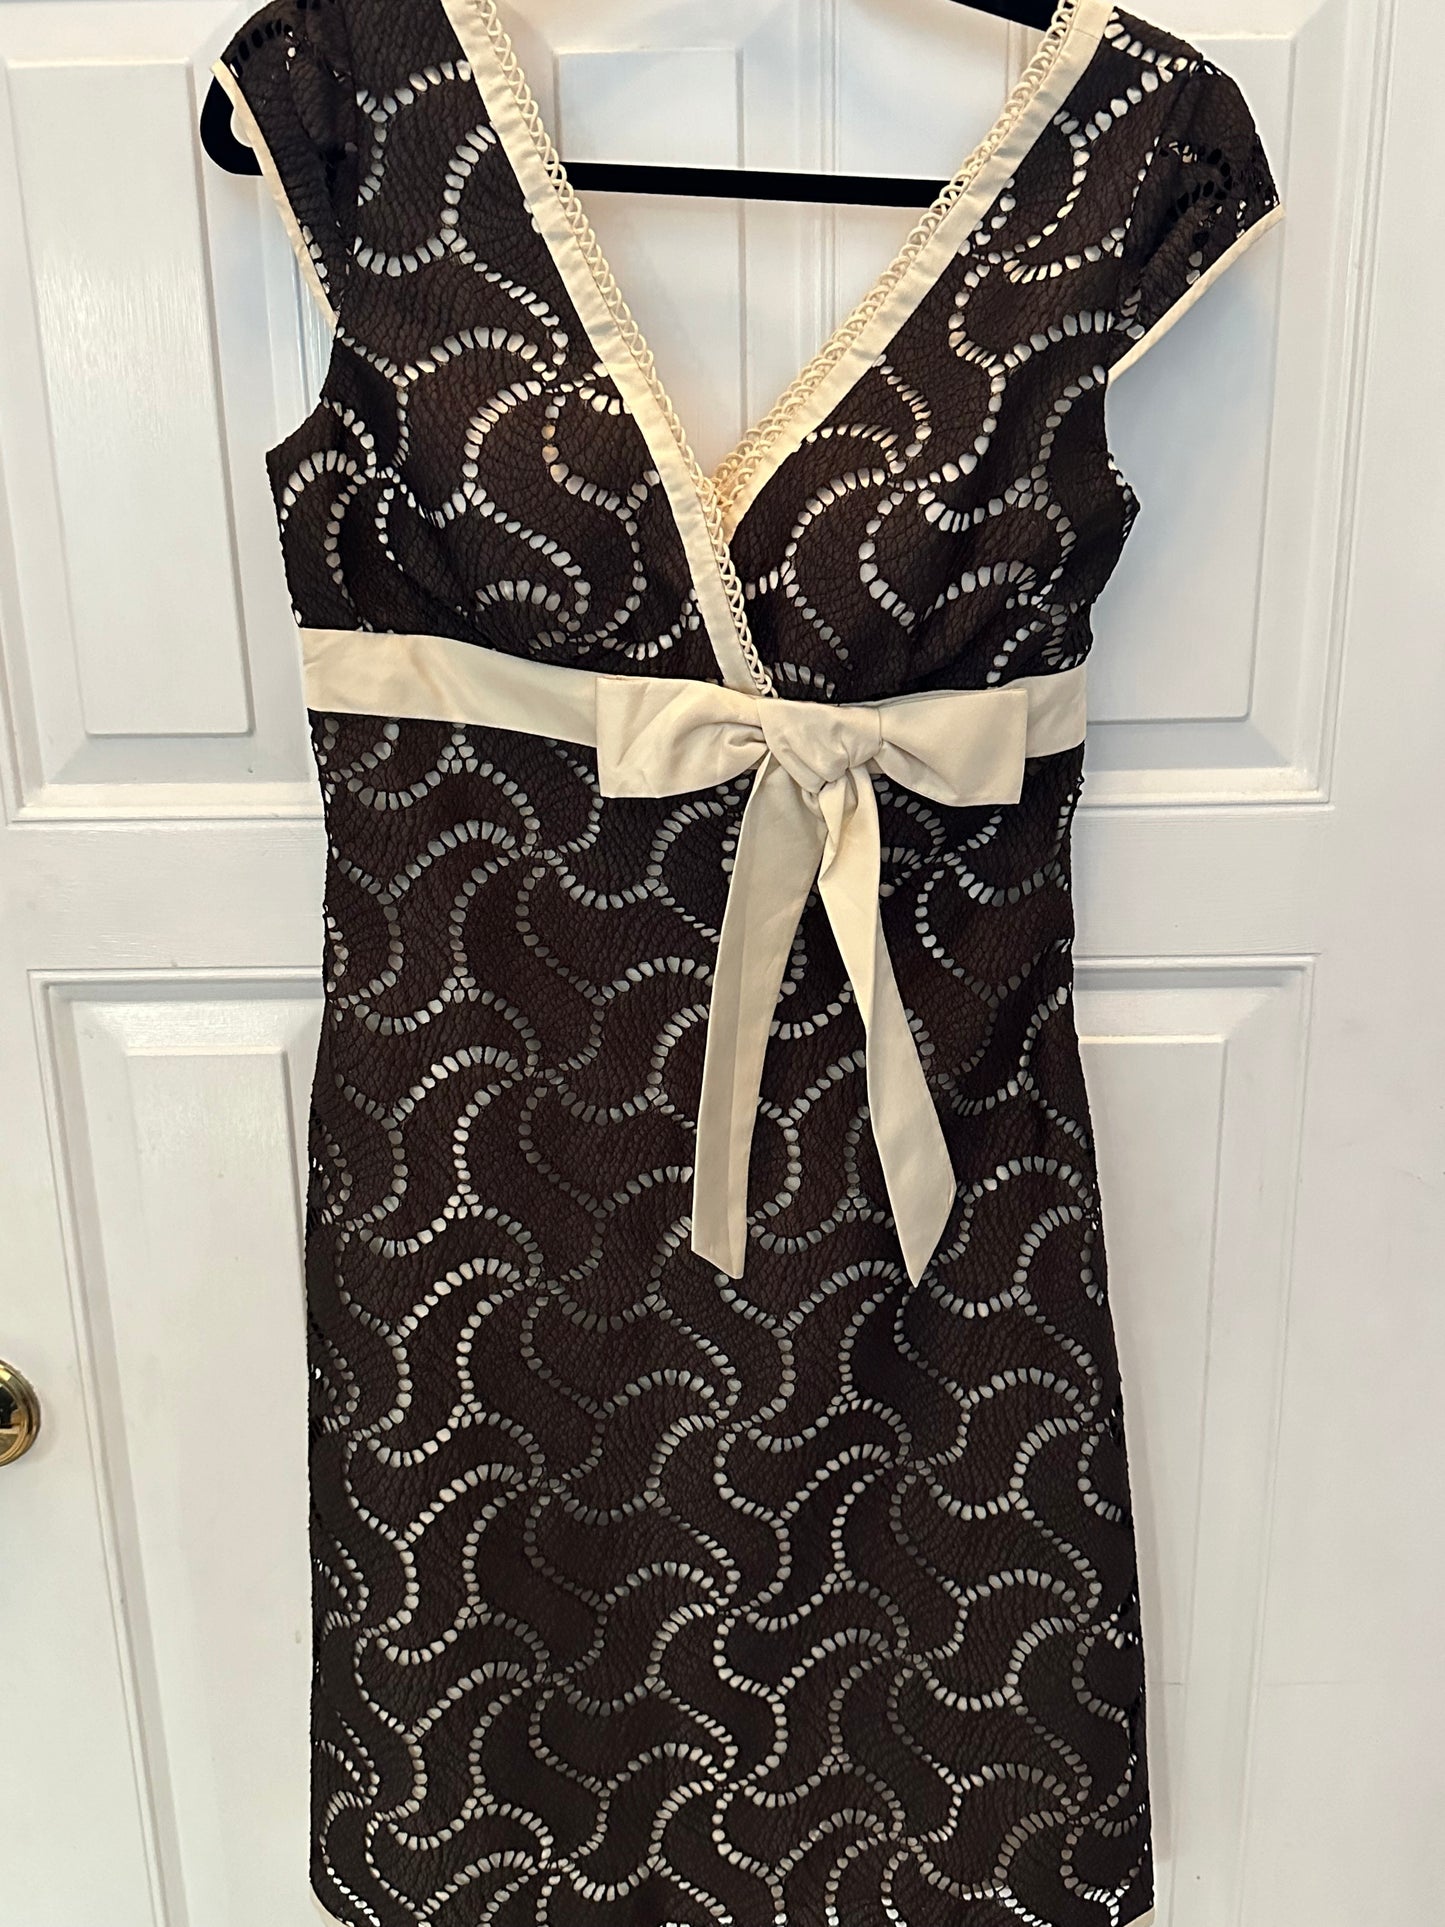 Phoebe Chocolate Brown Dress from SoHo in Hyde Park Sz 6 Retail $228